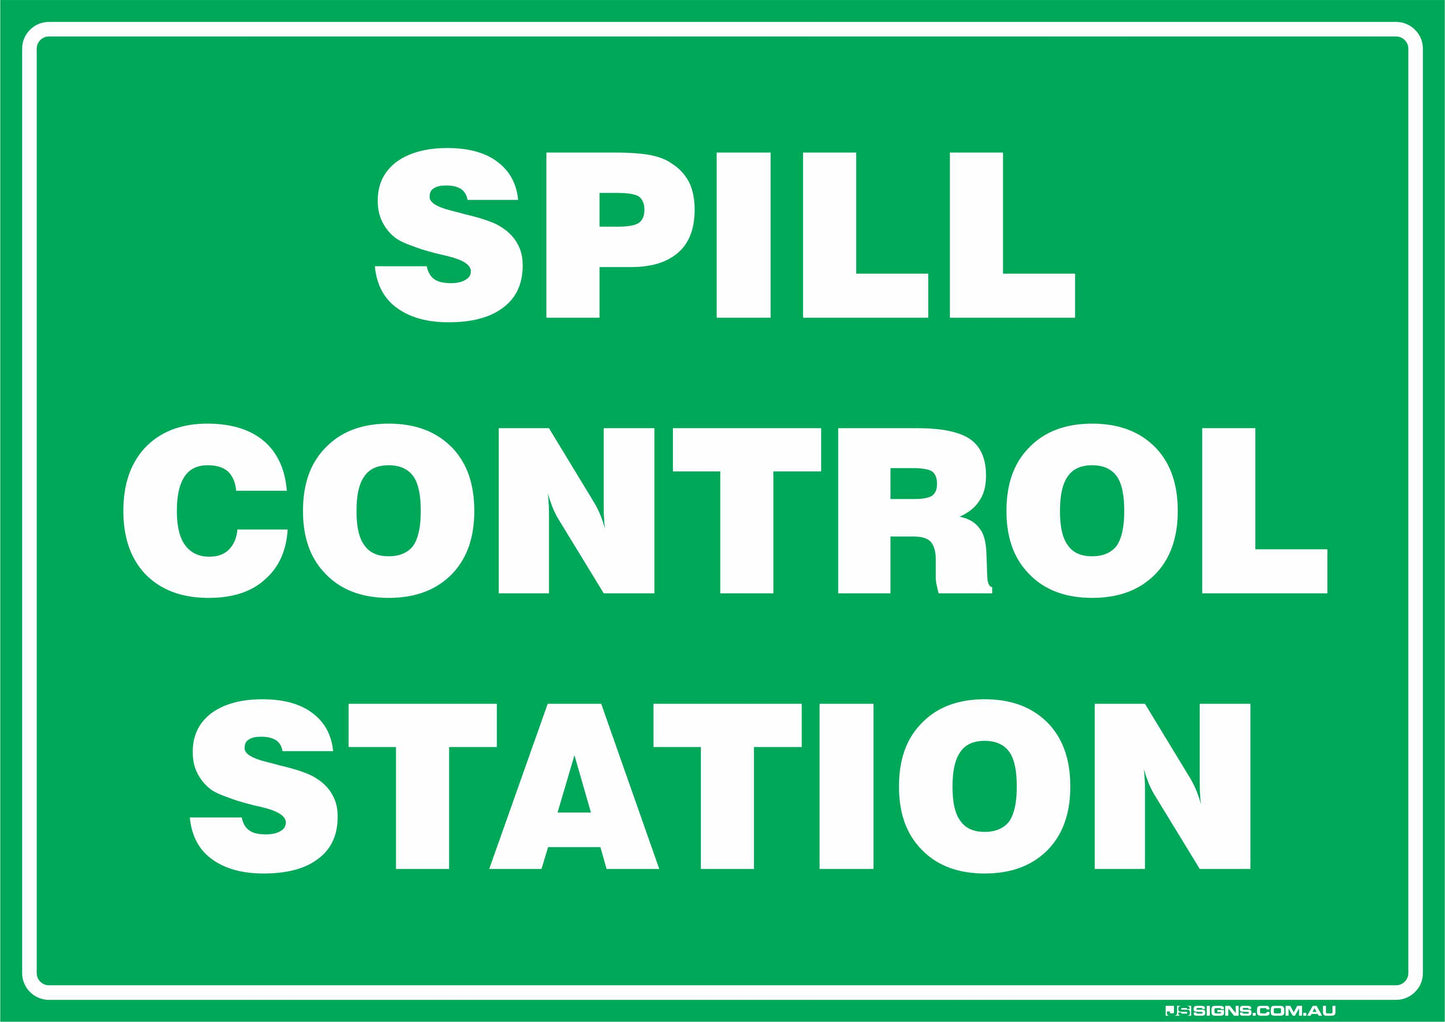 Spill Control Station